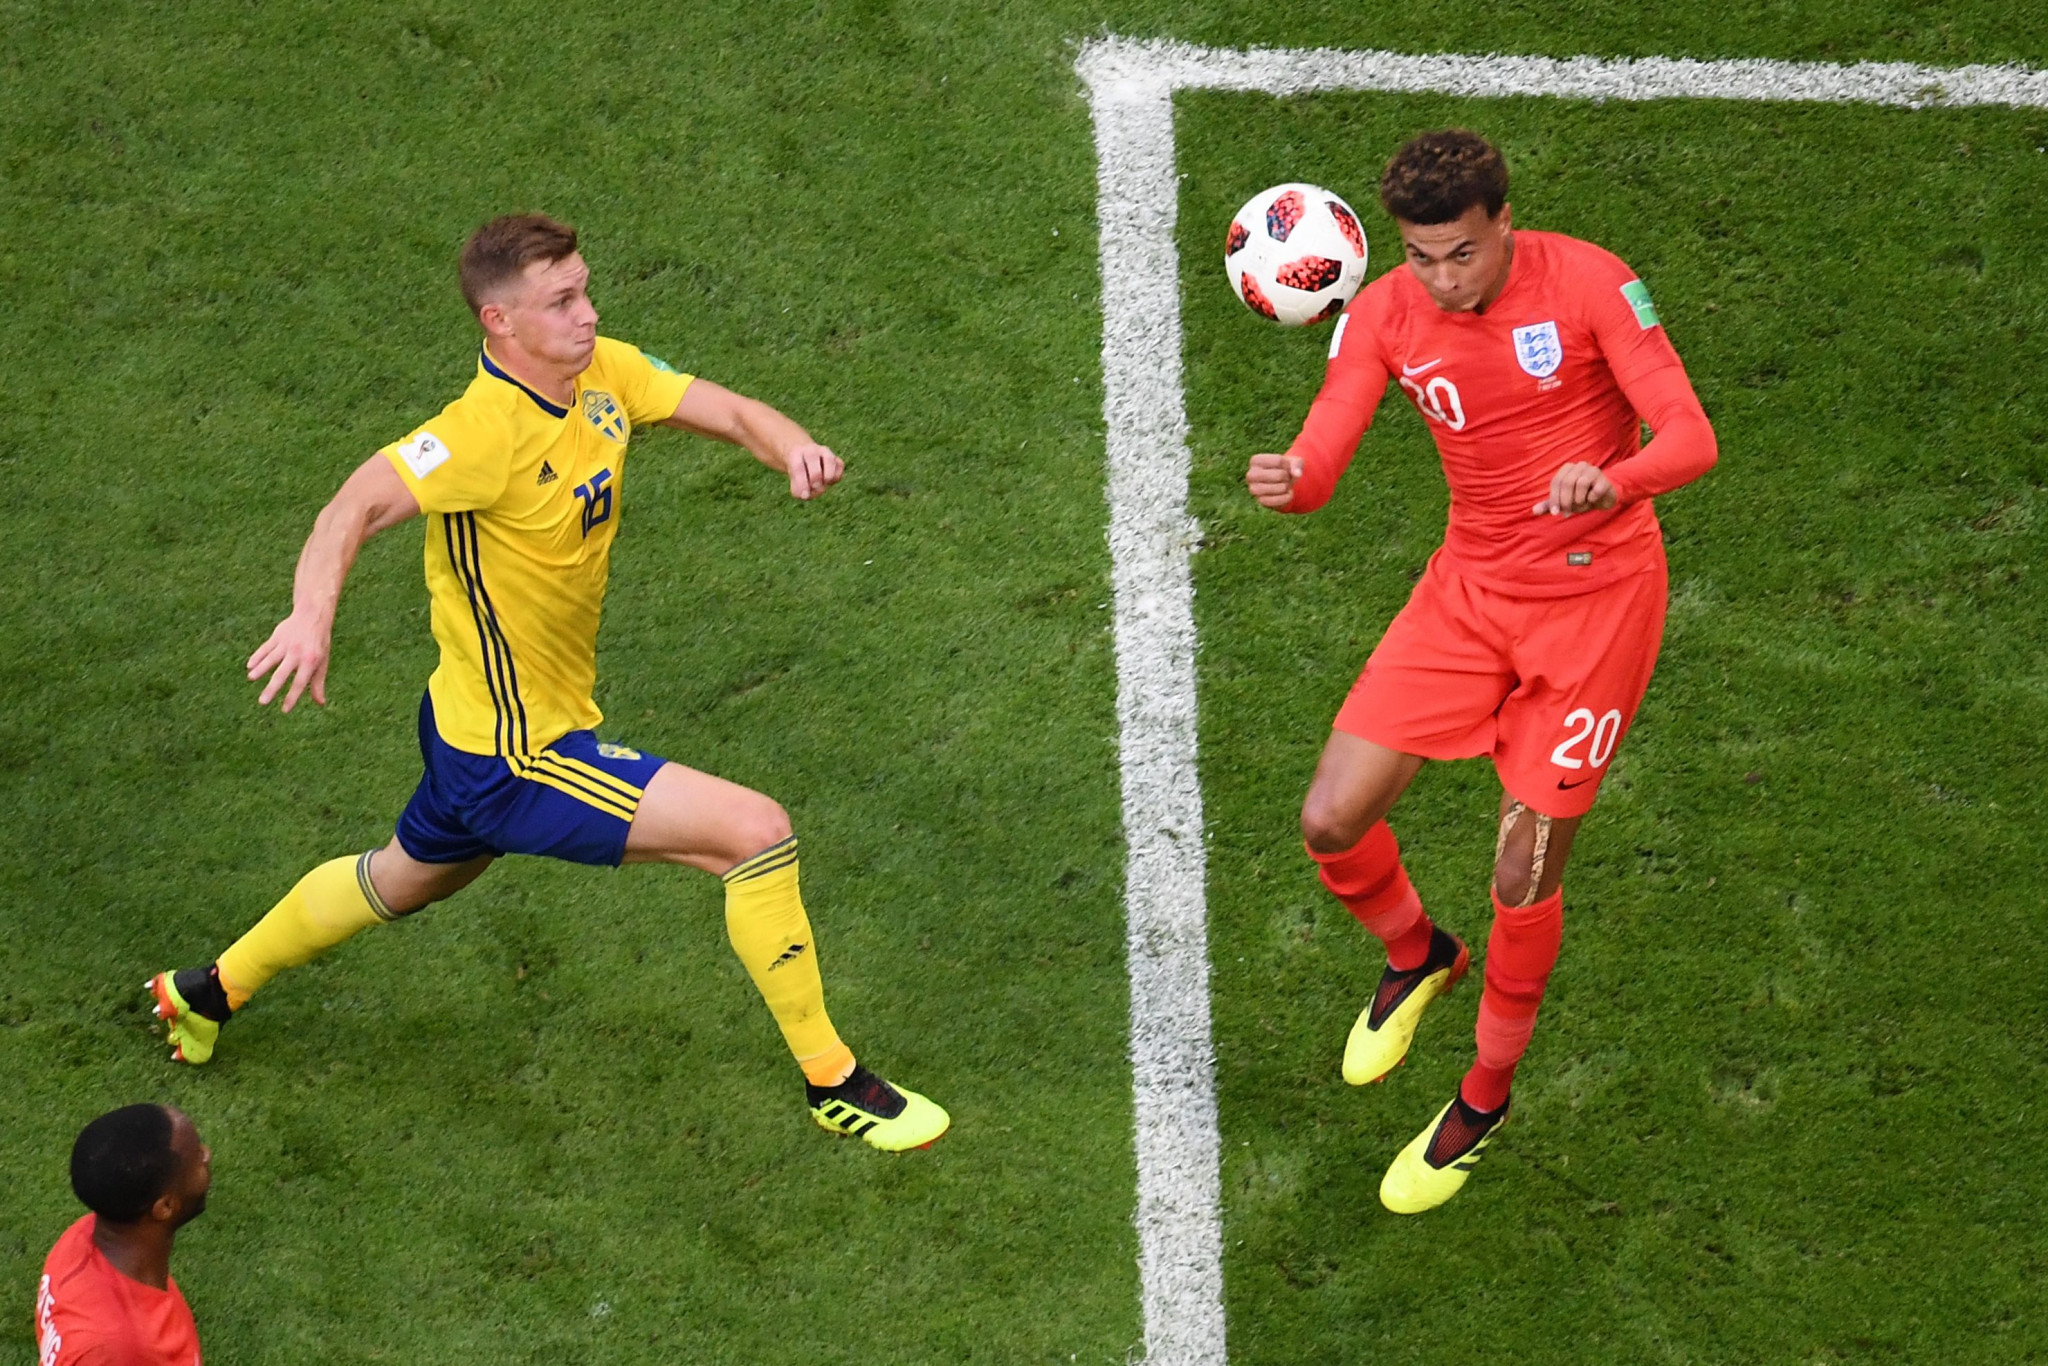 Dele Alli headed home the second goal for England against Sweden ©Getty Images